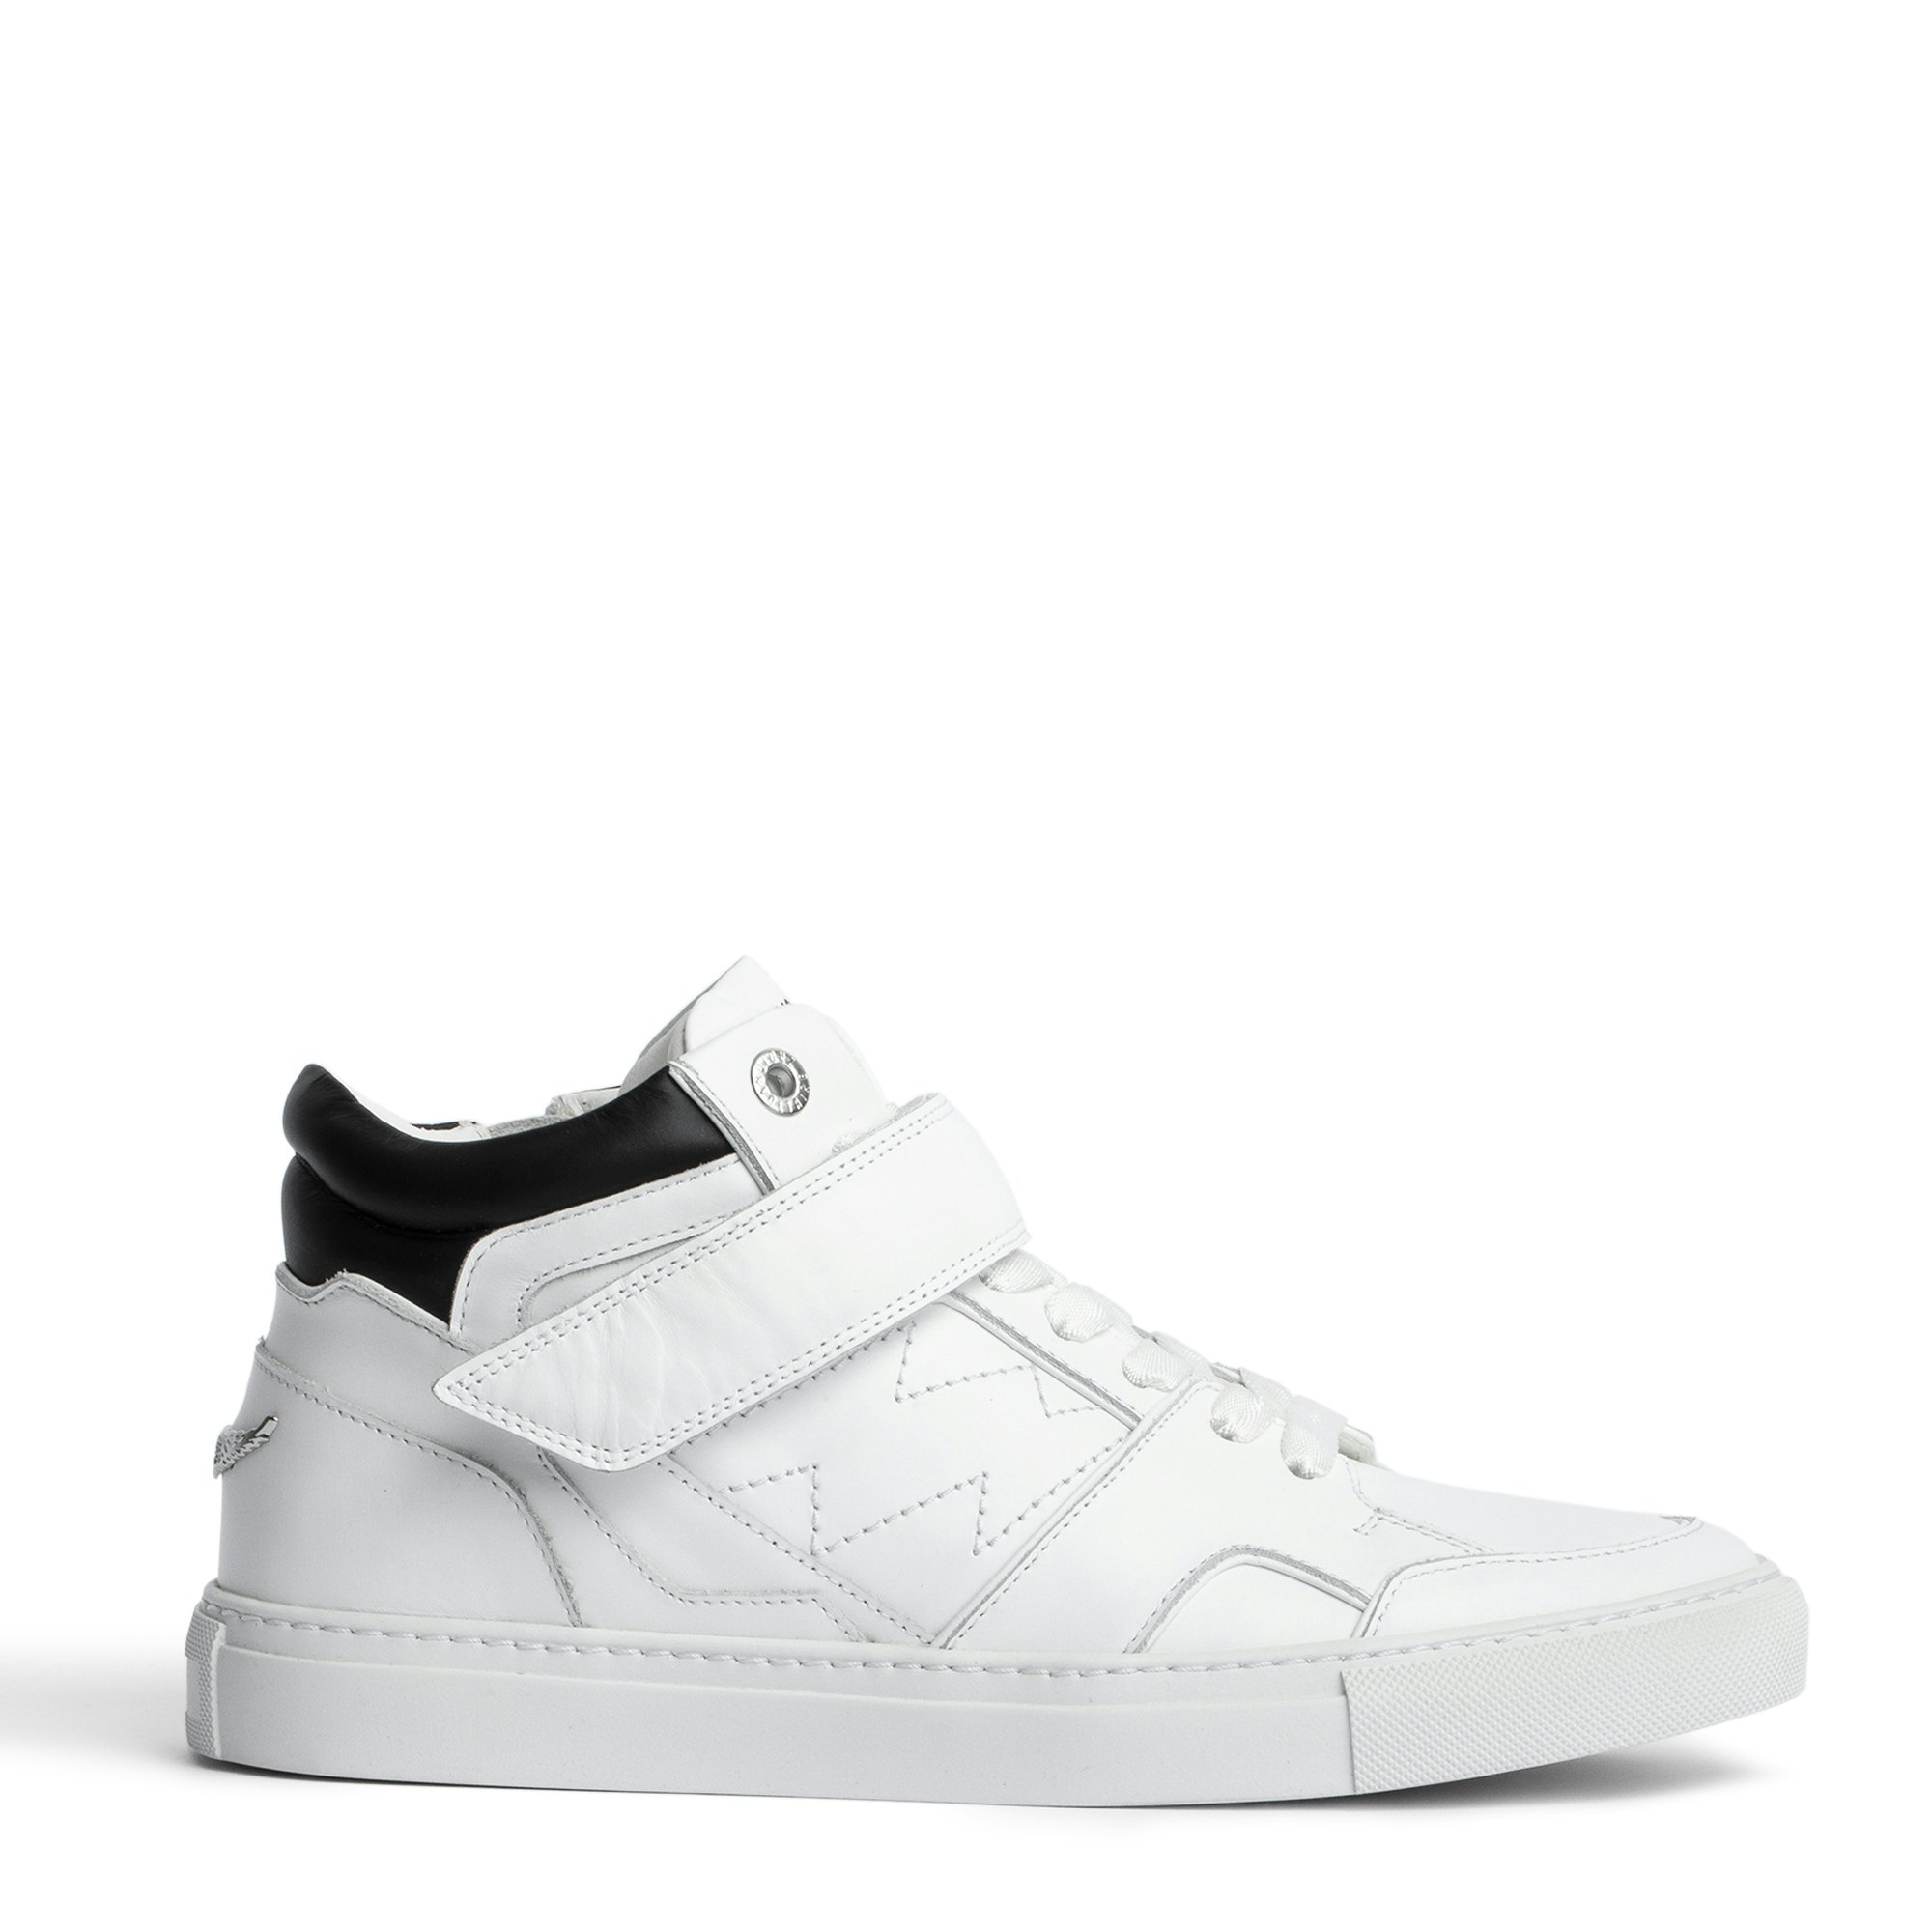 Sneakers Zv1747 Mid Flash Blanc - Taille 38 - Femme